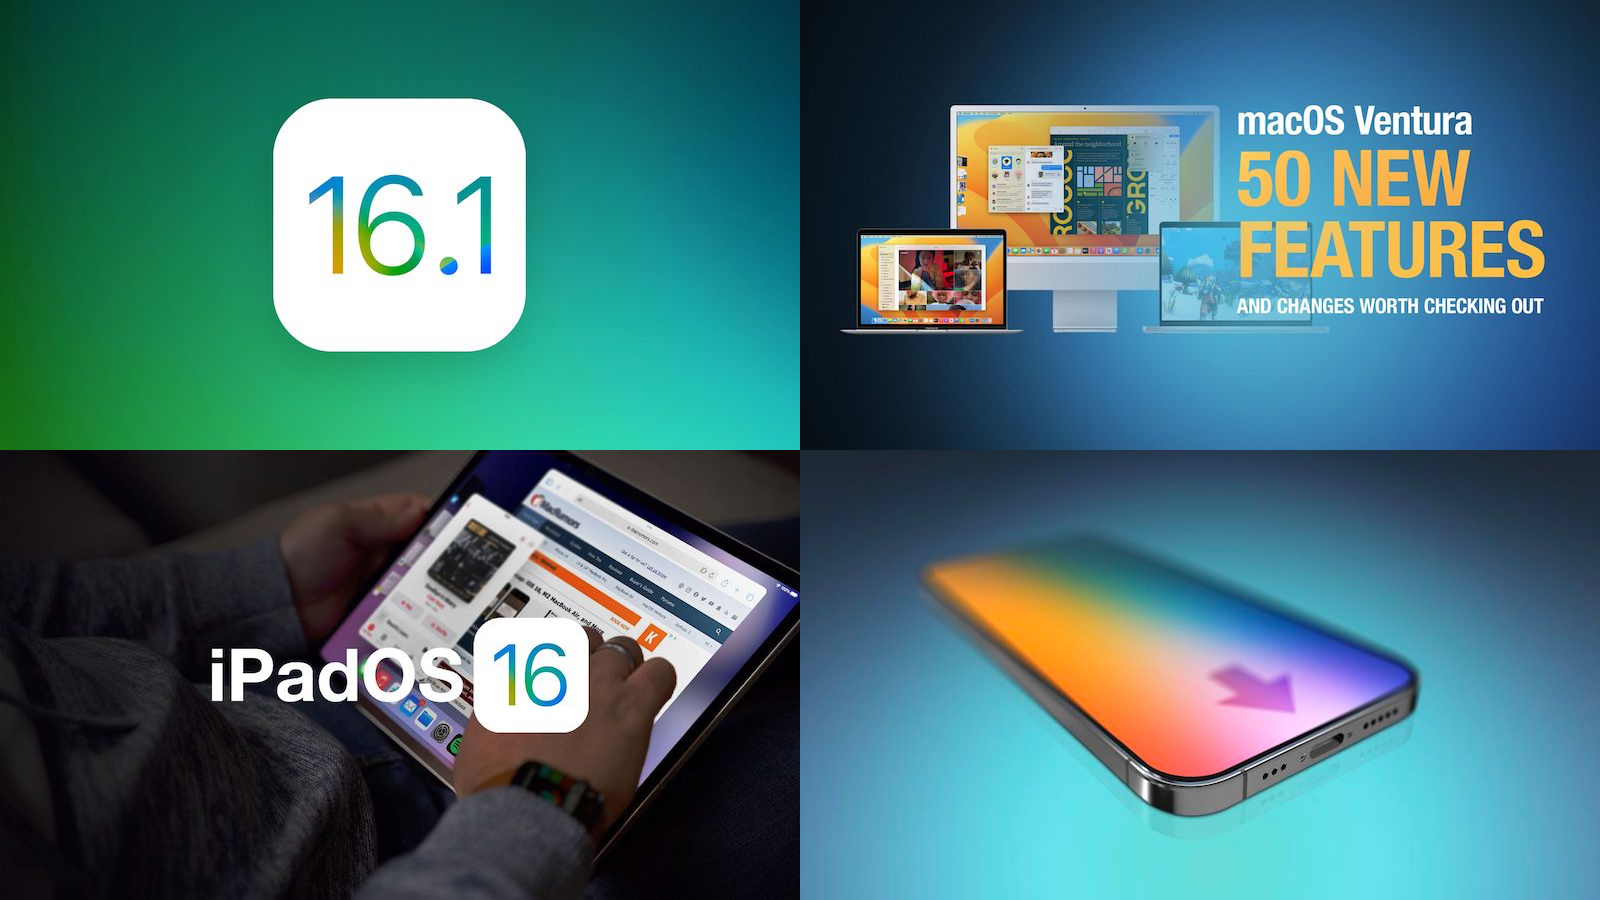 Top Stories: New iOS 16.1 Features, USB-C iPhone Confirmed, and More